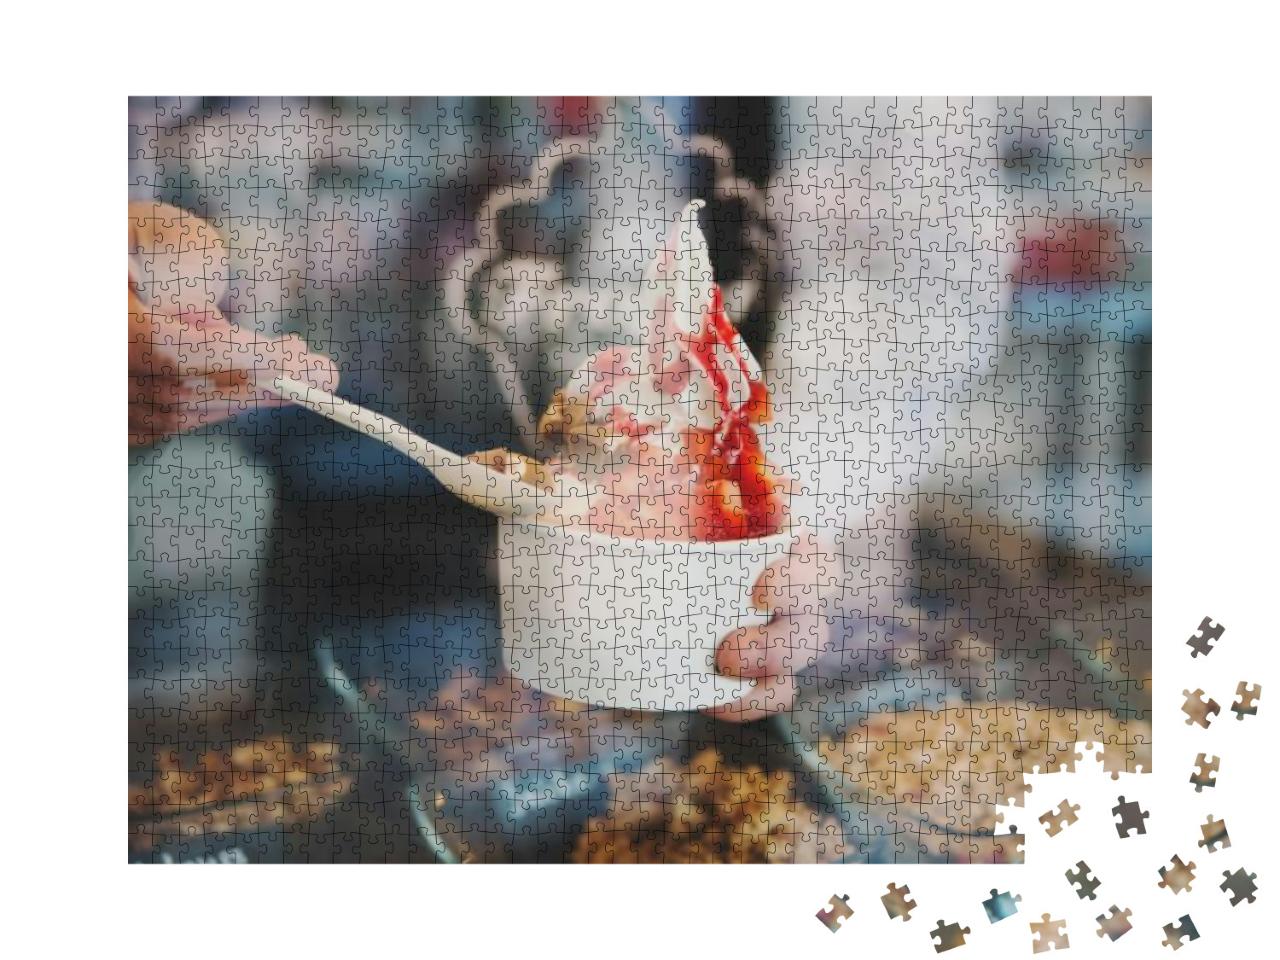 Seller Pours Sauce on a Soft Frozen Yoghurt in White Take... Jigsaw Puzzle with 1000 pieces